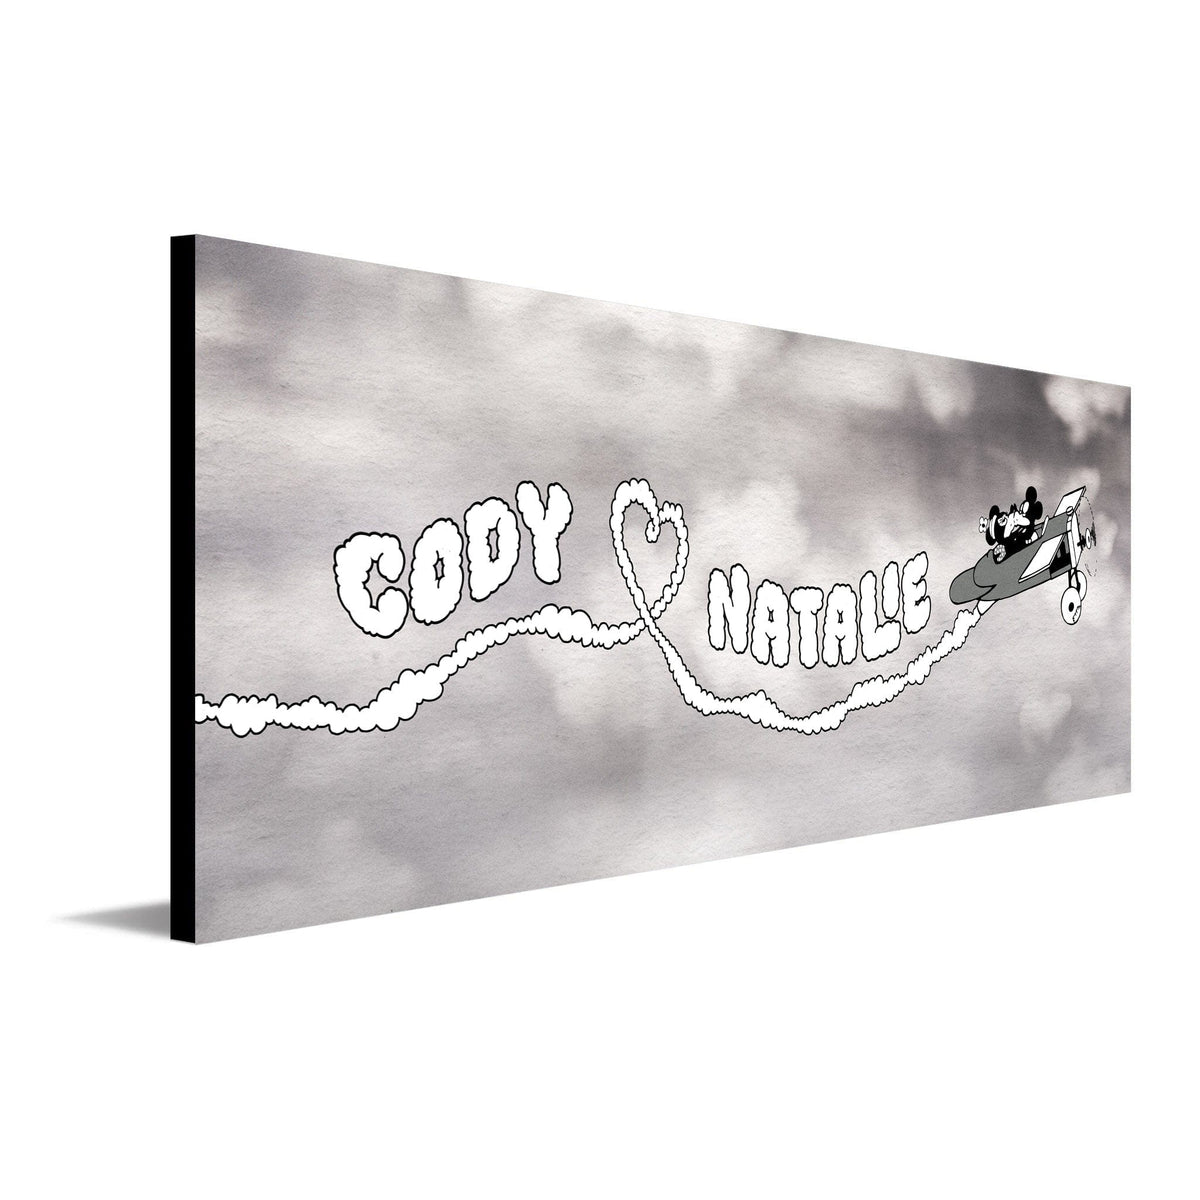 Plane Crazy Personalized Mickey Mouse Art Block Mount Option